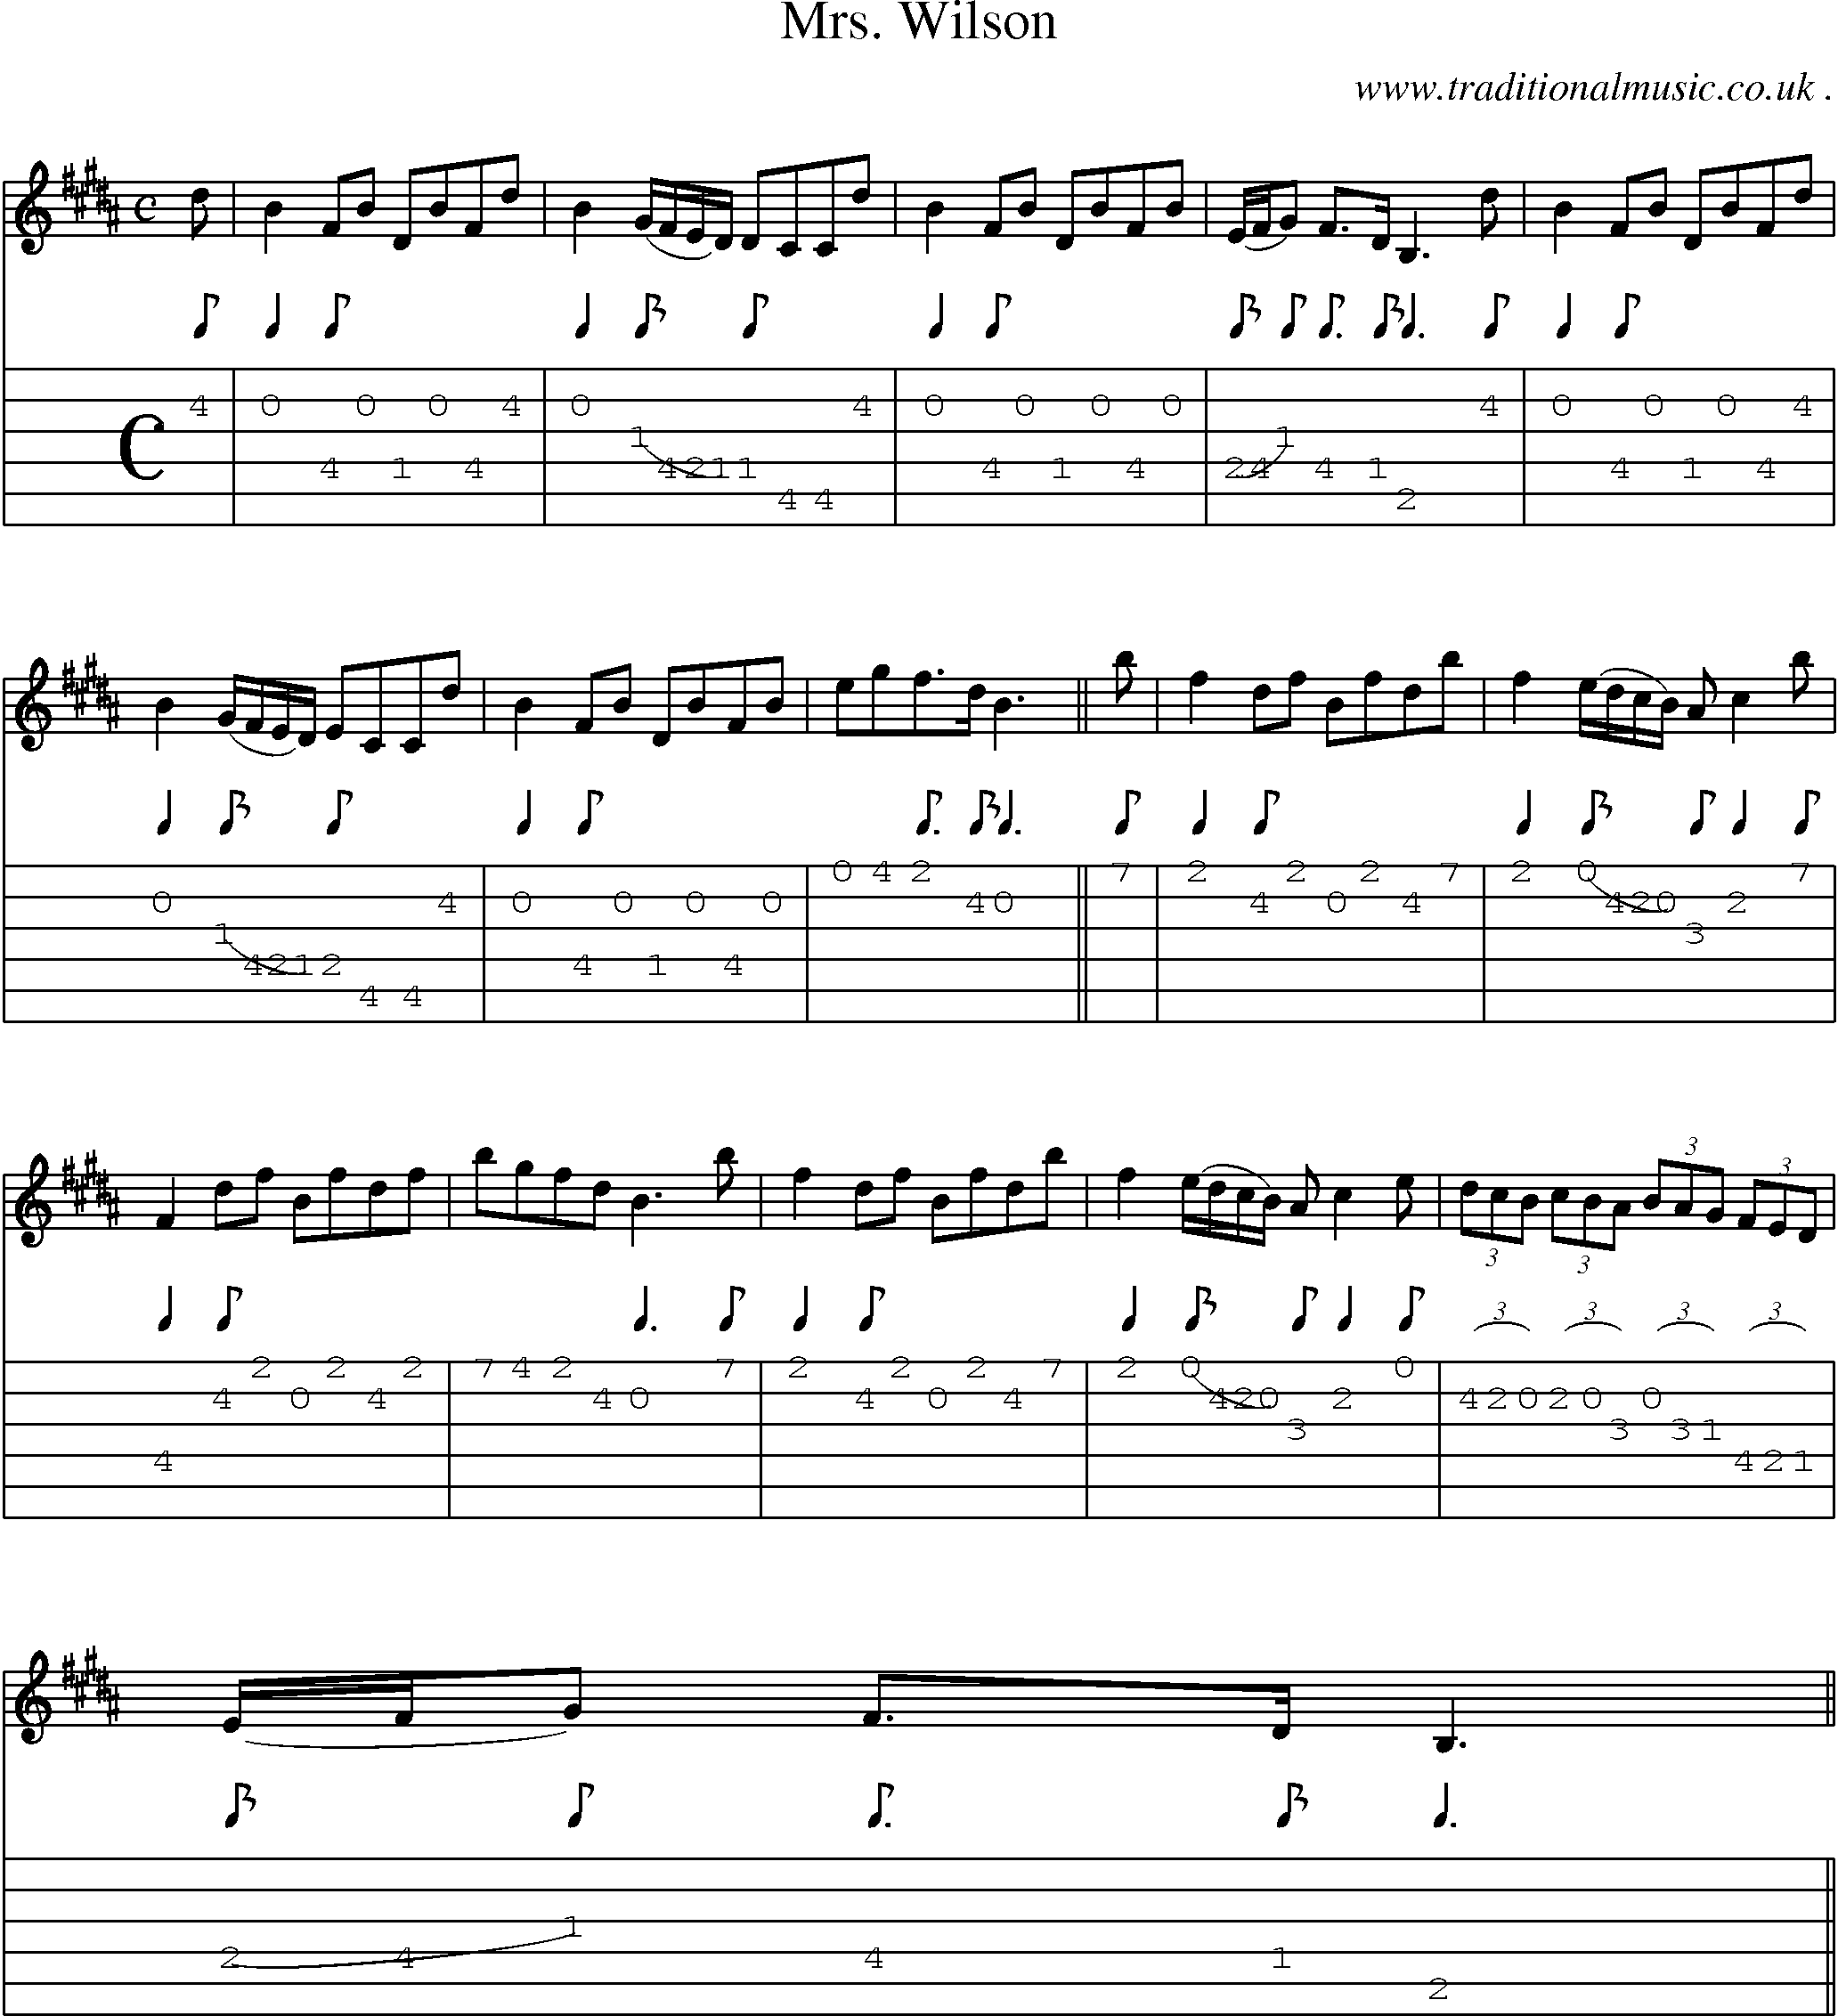 Sheet-music  score, Chords and Guitar Tabs for Mrs Wilson